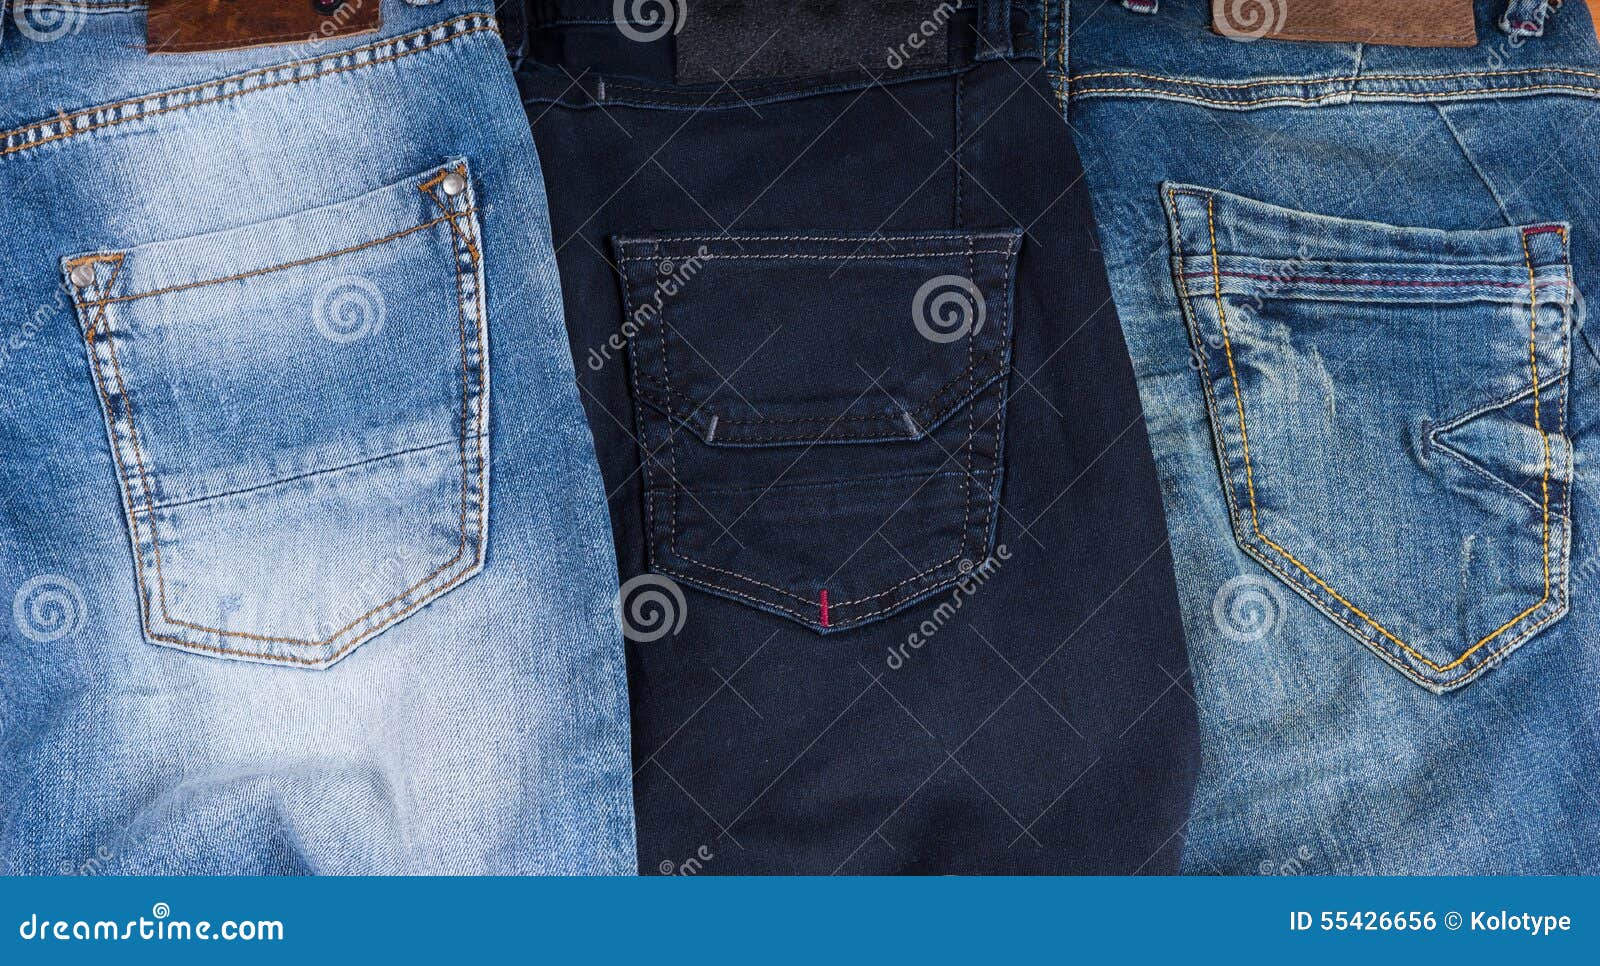 Rear Pockets of Different Styles of Blue Jeans Stock Photo - Image of ...